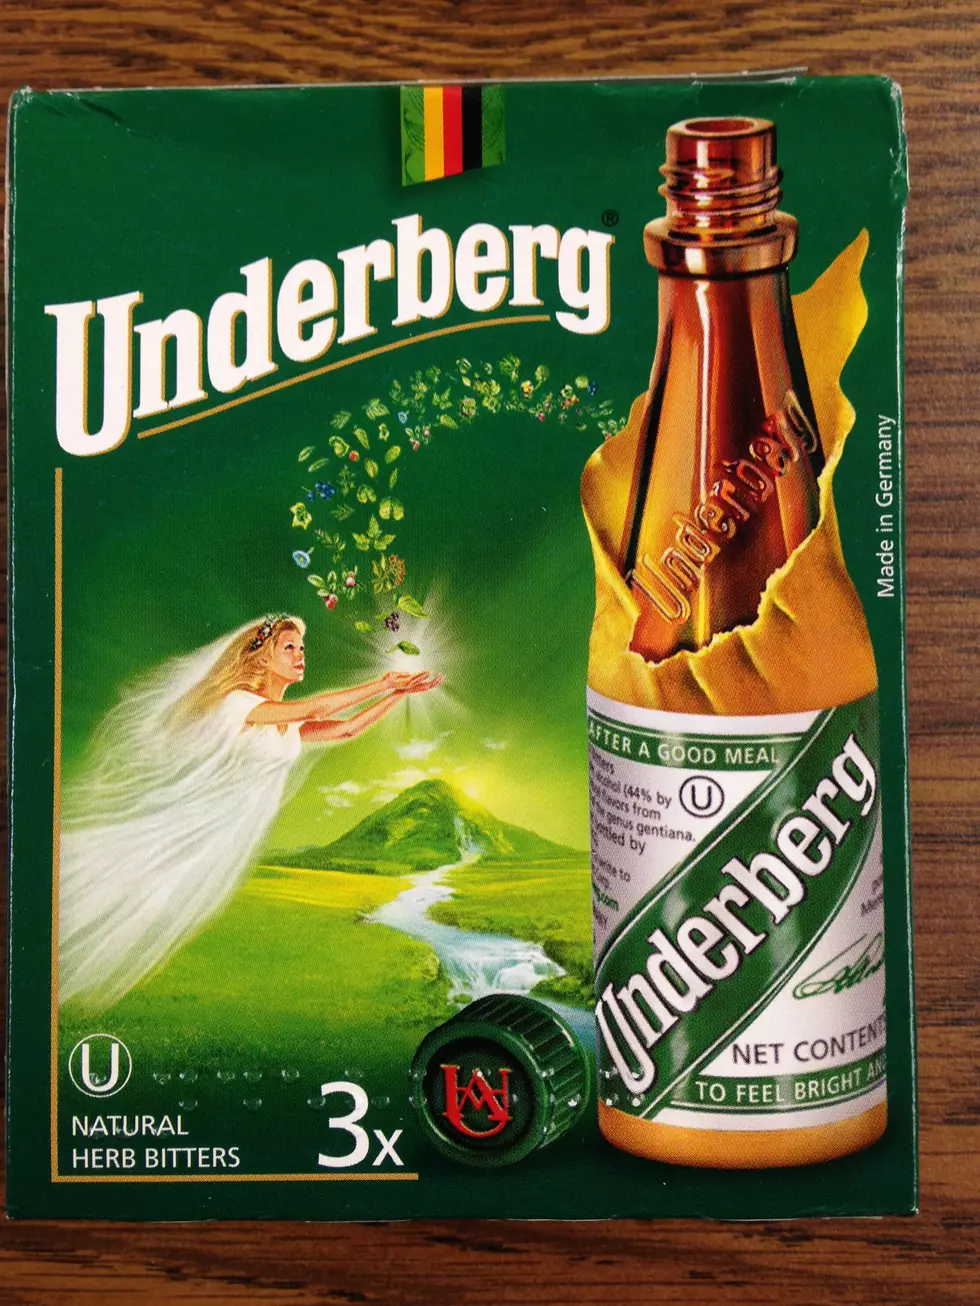 Will Jerry Eat It? Underberg Herb Bitters